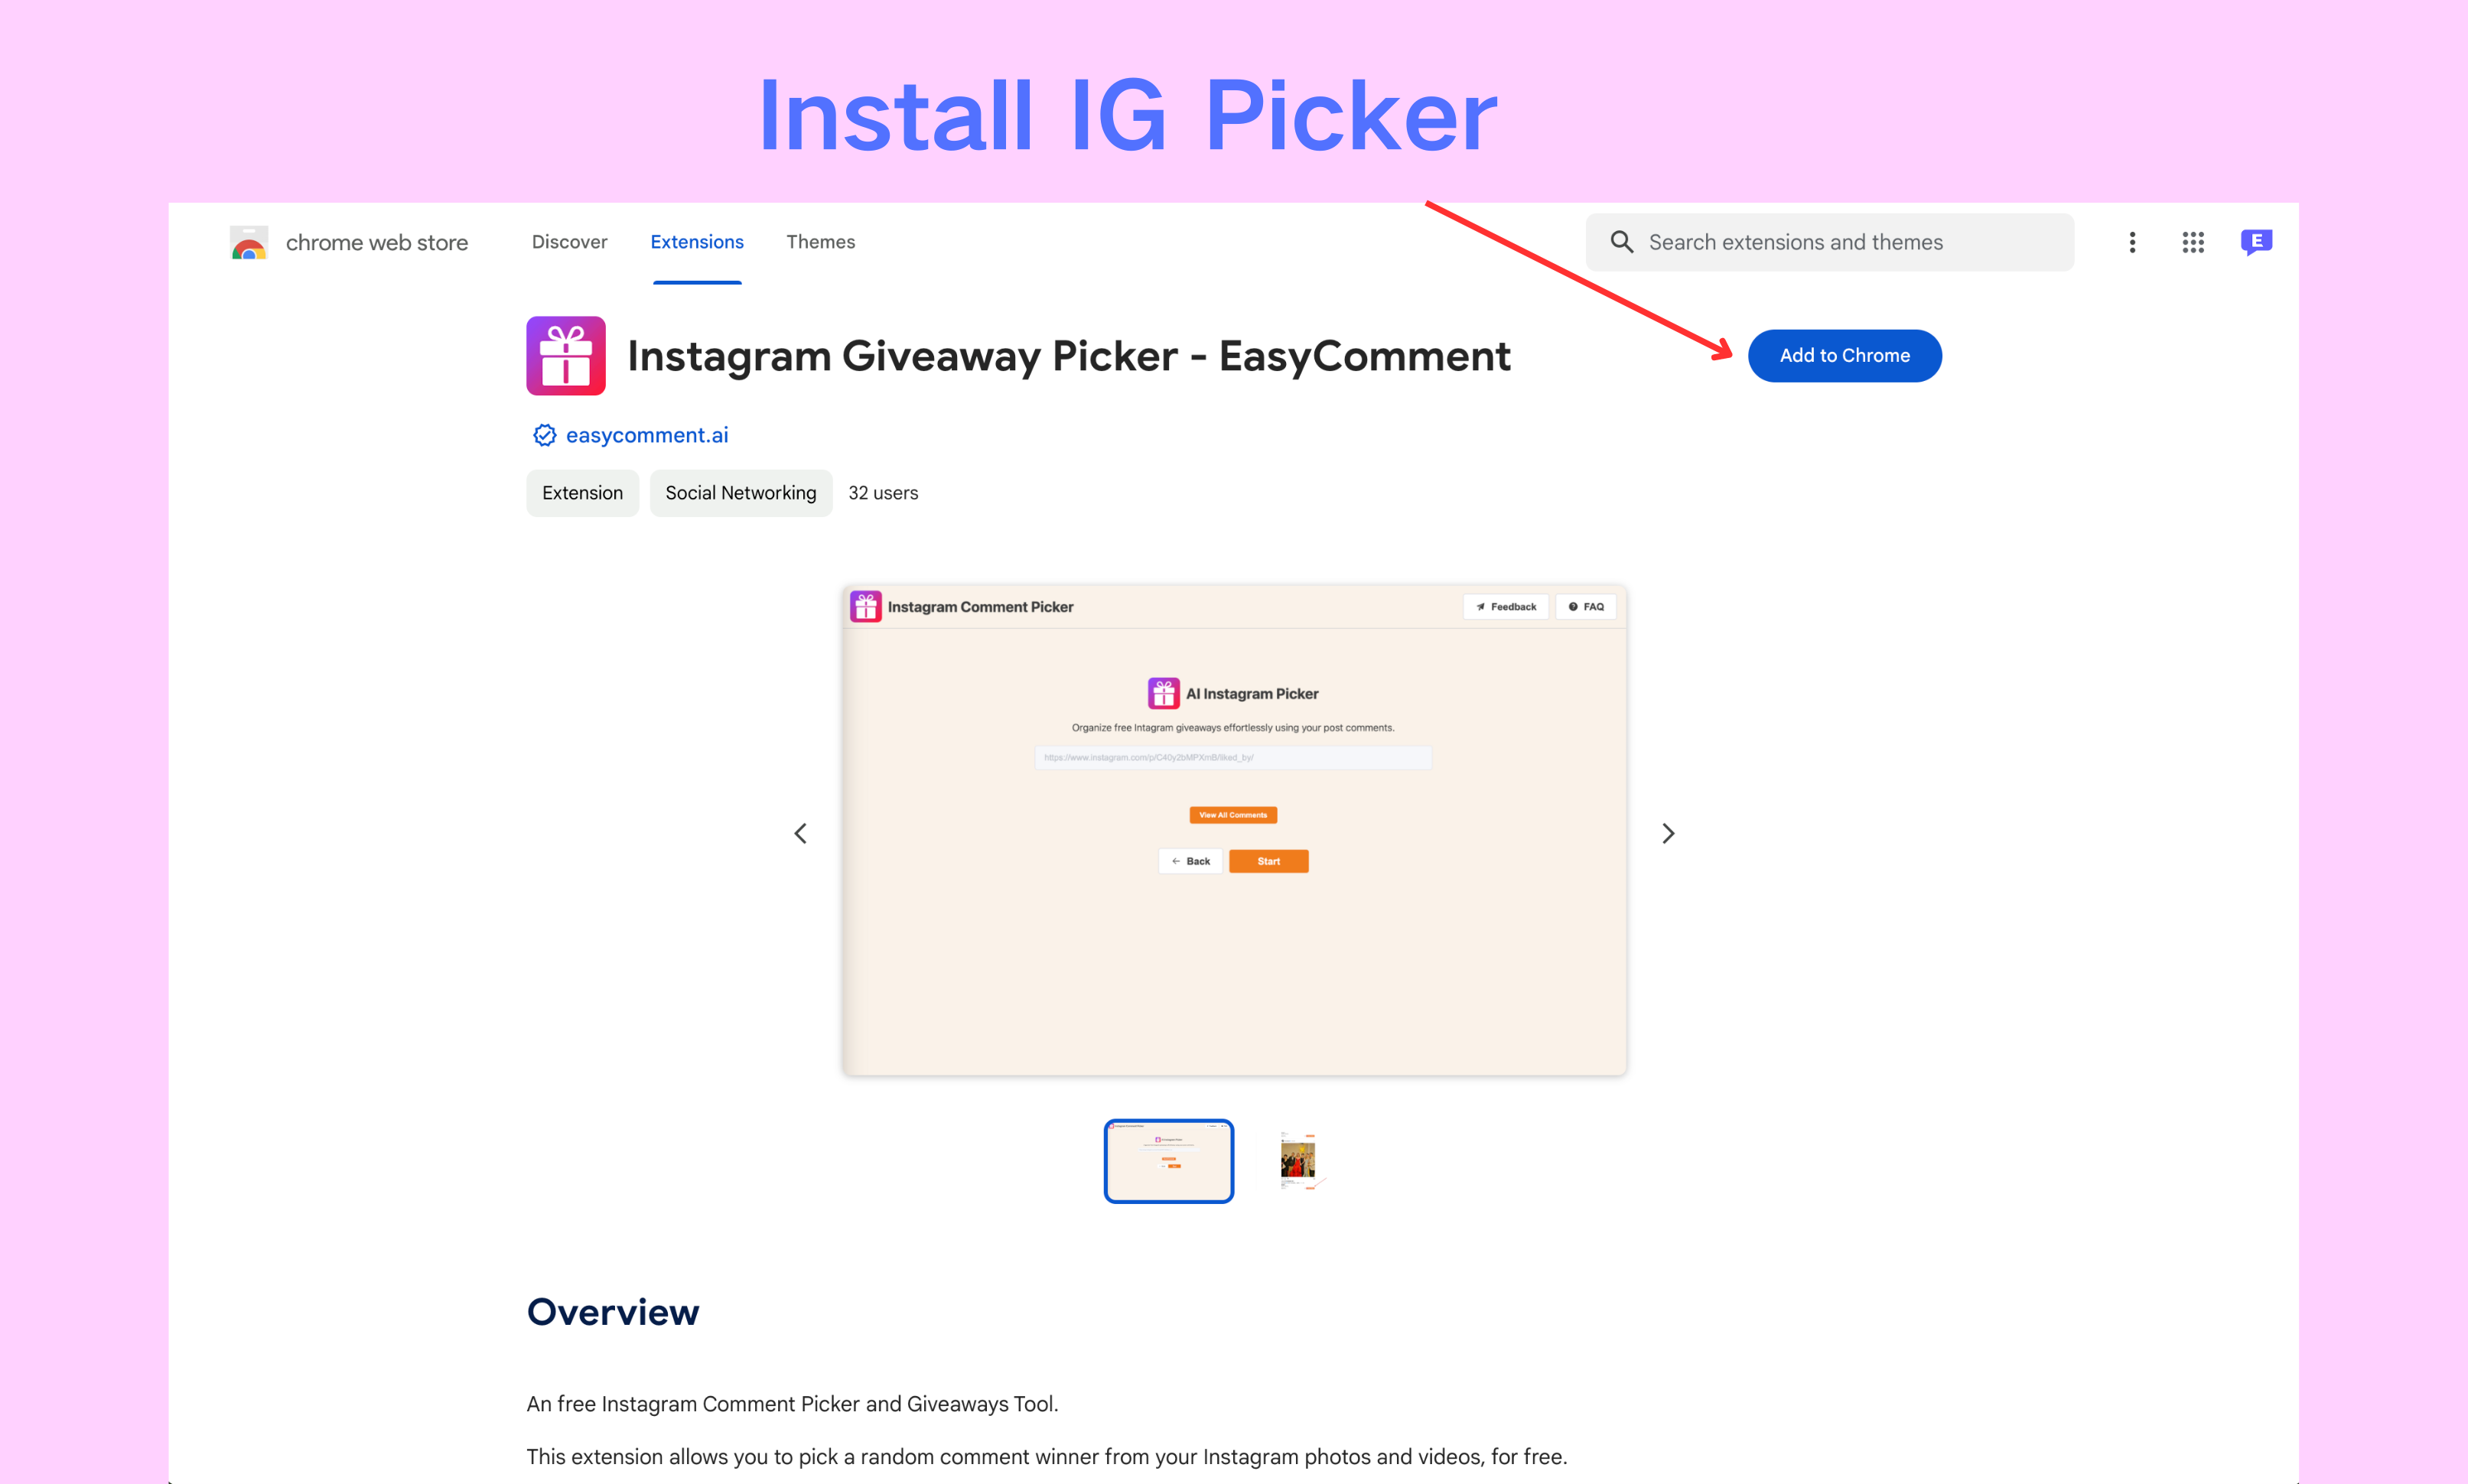 Install and Open the Intagram Giveaway Picker Extension